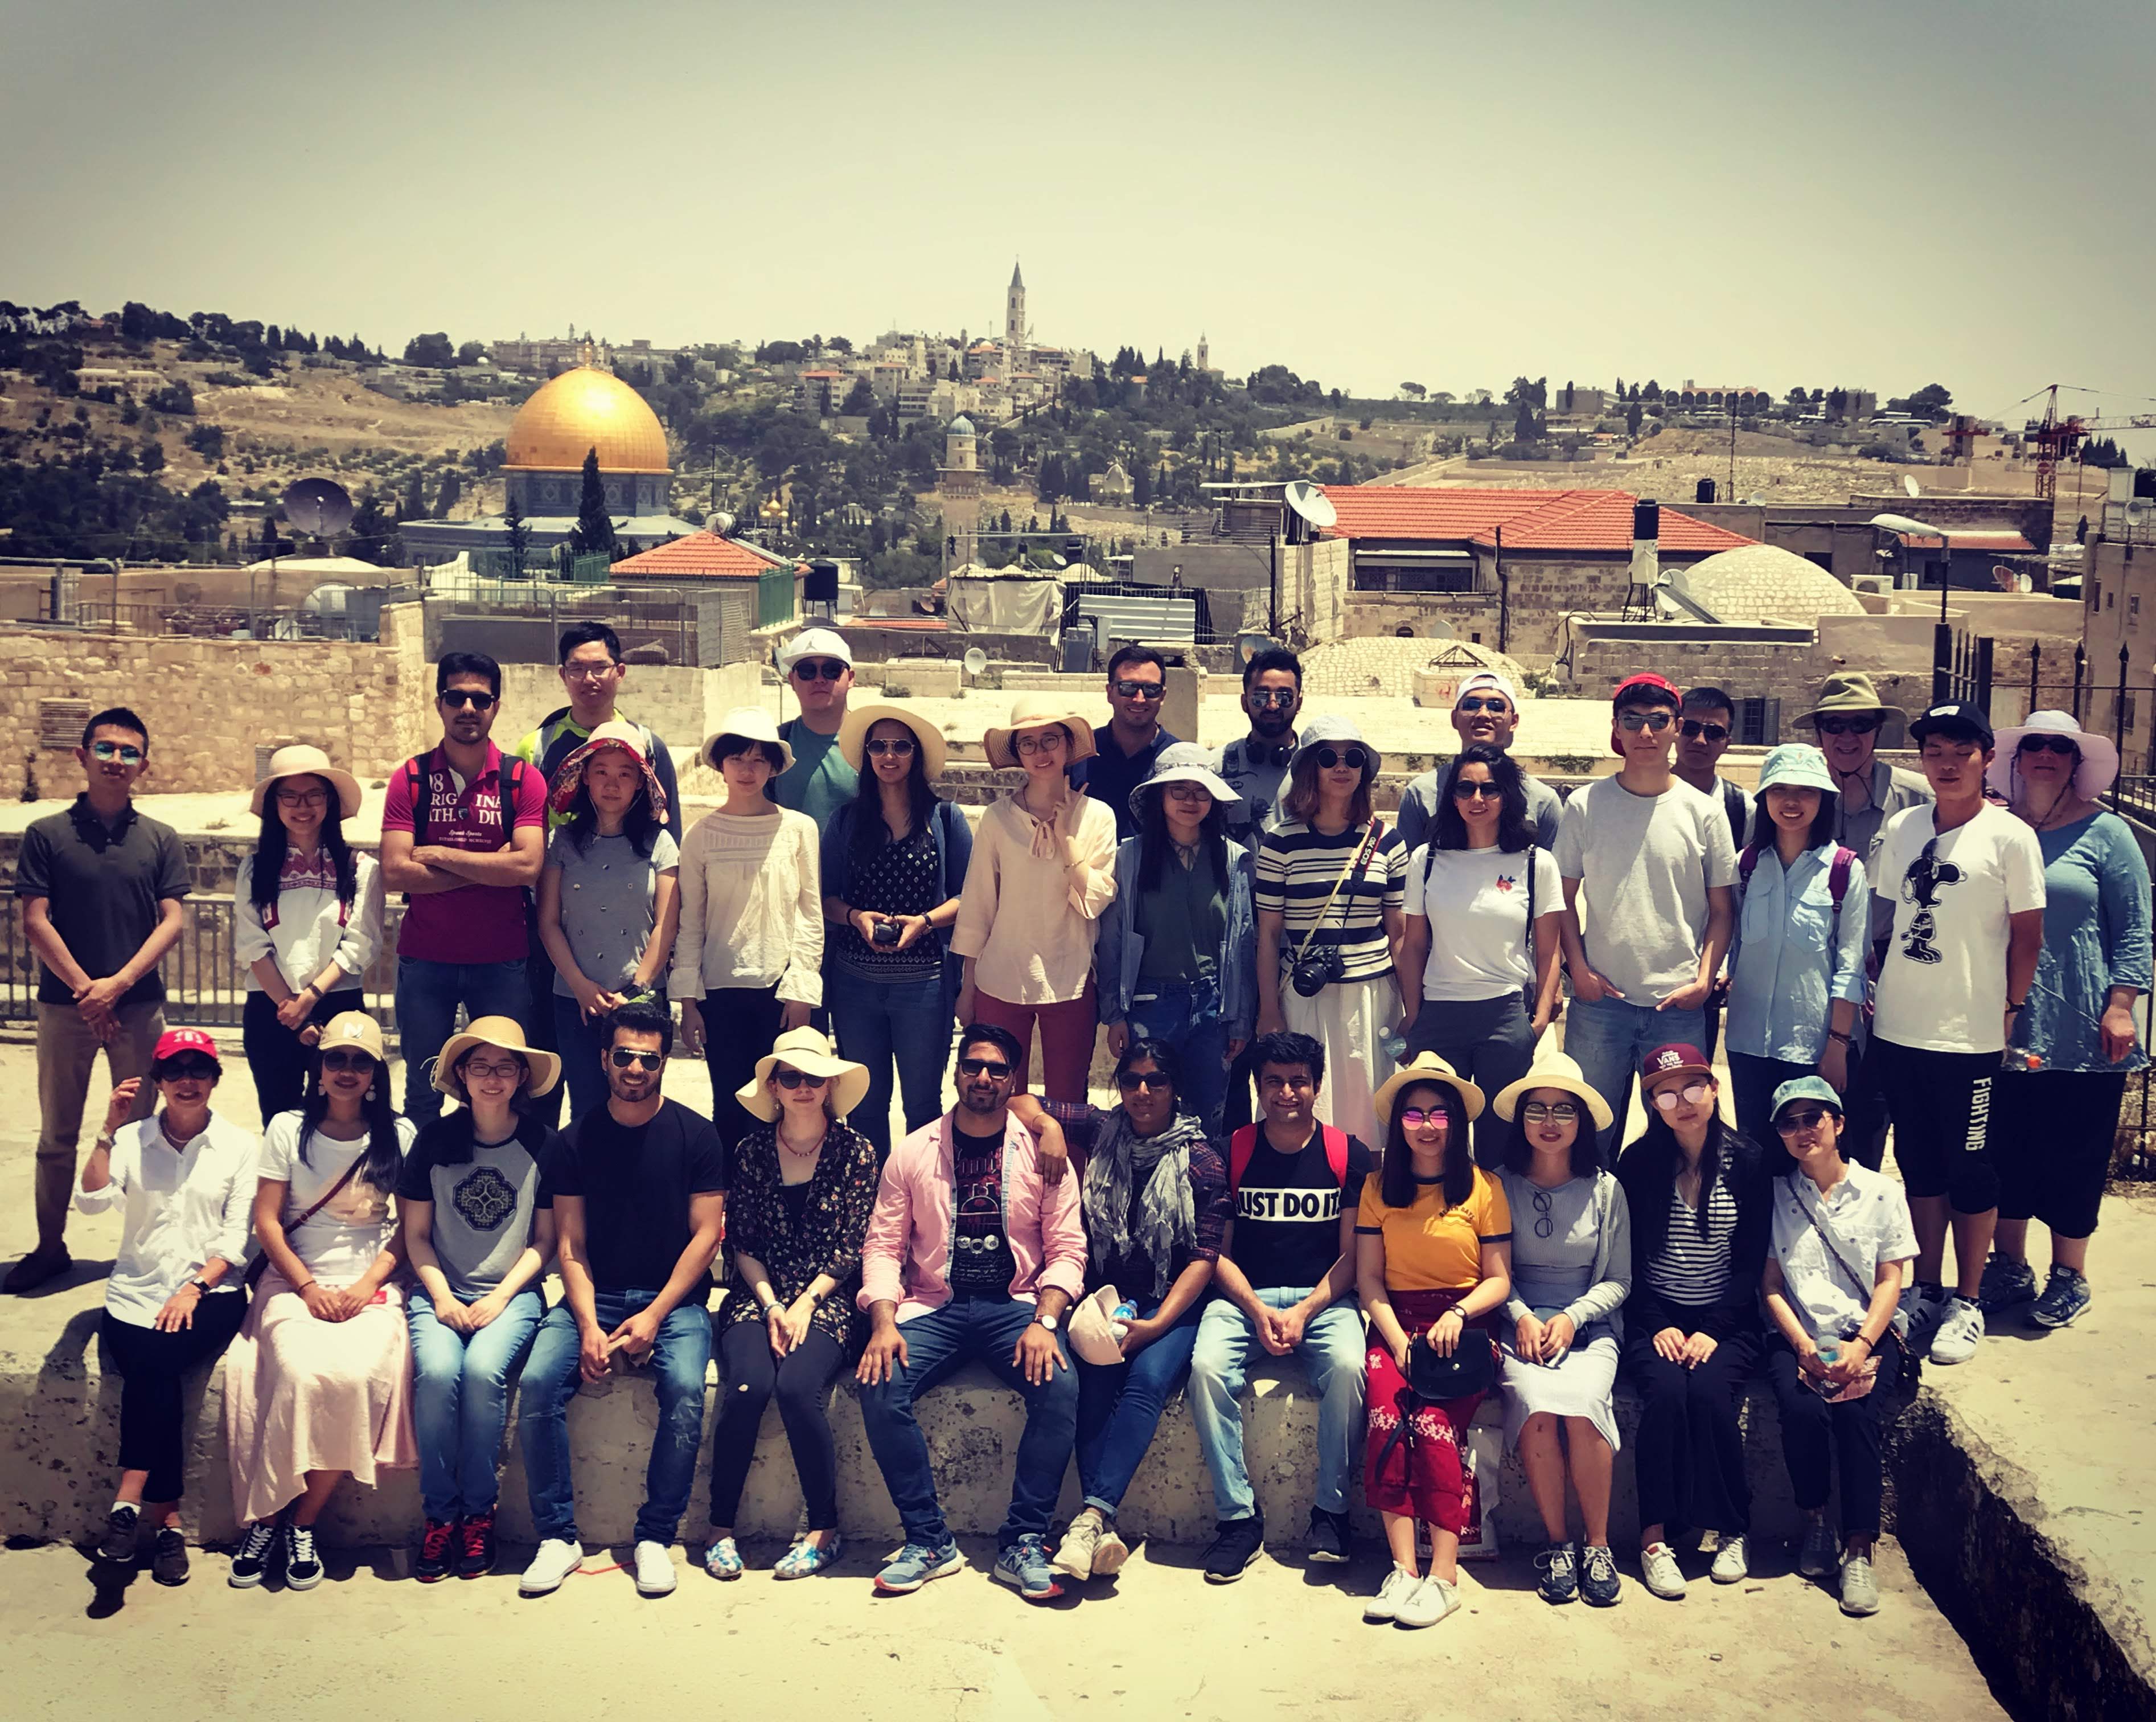 Hassenfeld fellows in Jerusalem taking in a rooftop view of the Old City.